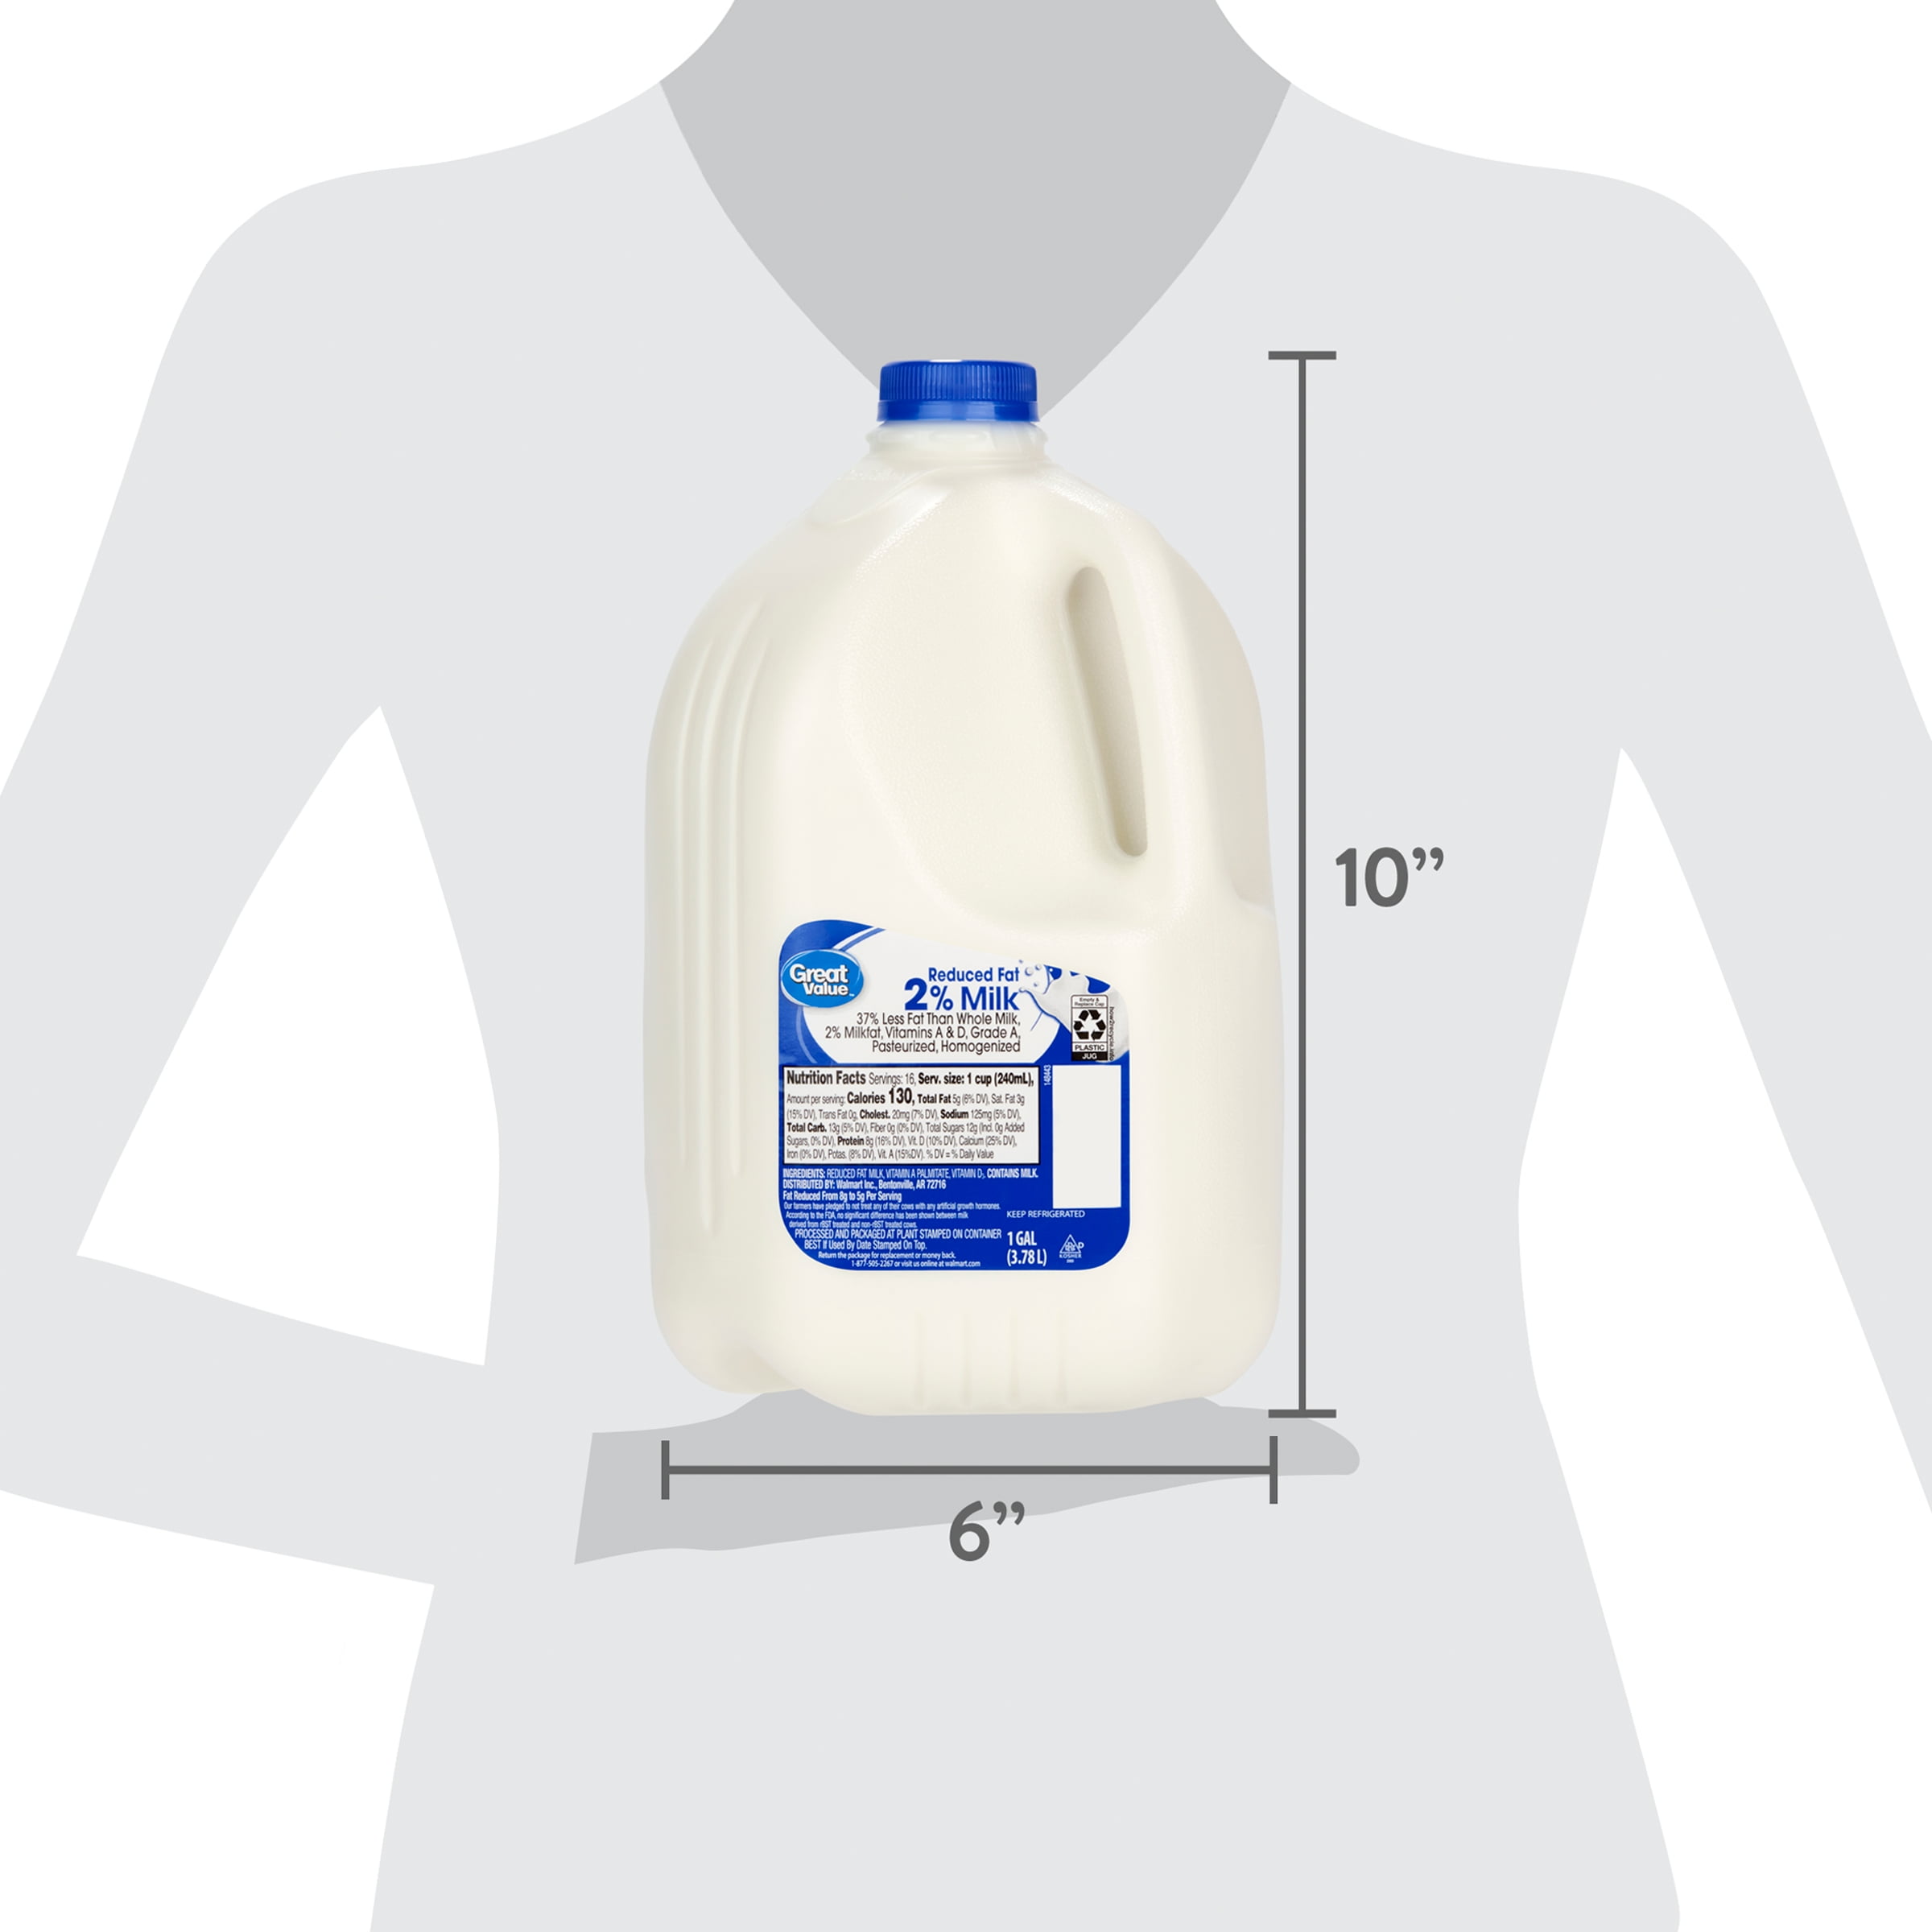 Why Do Milk Jugs Have Circles Built Into Their Sides? Details!